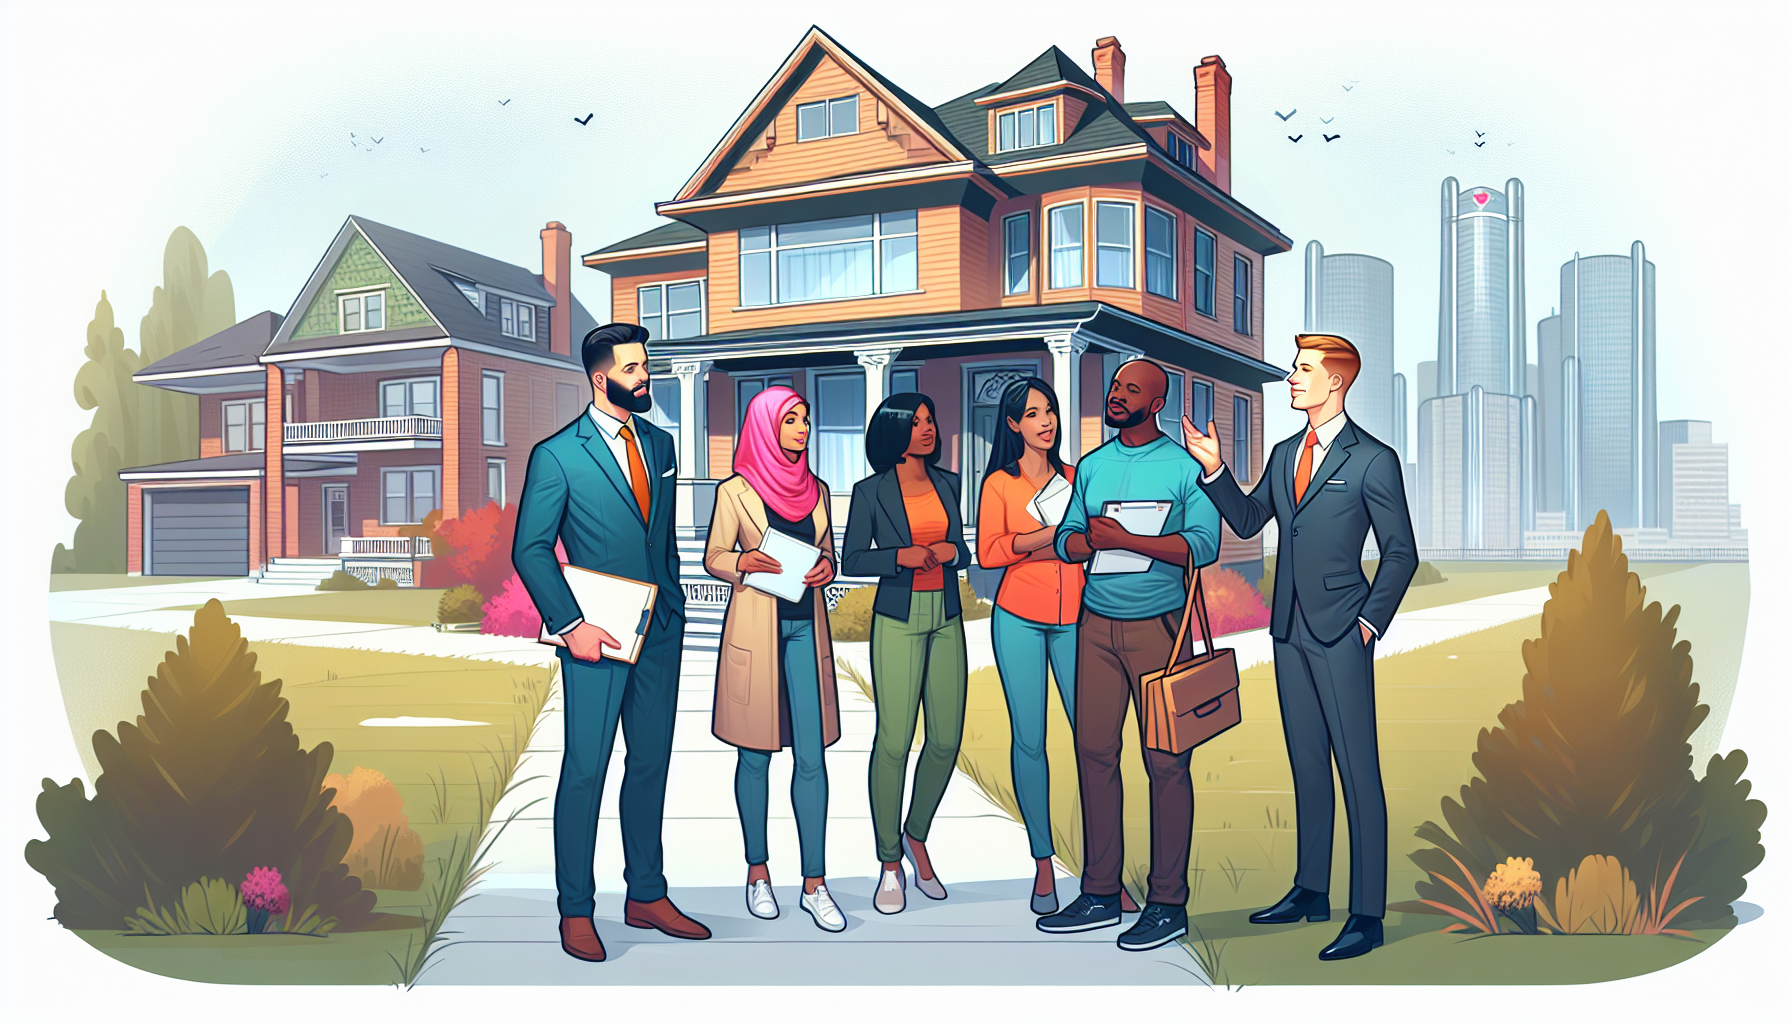 Create an image of a diverse group of people touring a beautiful, newly renovated house in Detroit with a realtor, discussing features and potential bids. The house should reflect the charm and histor